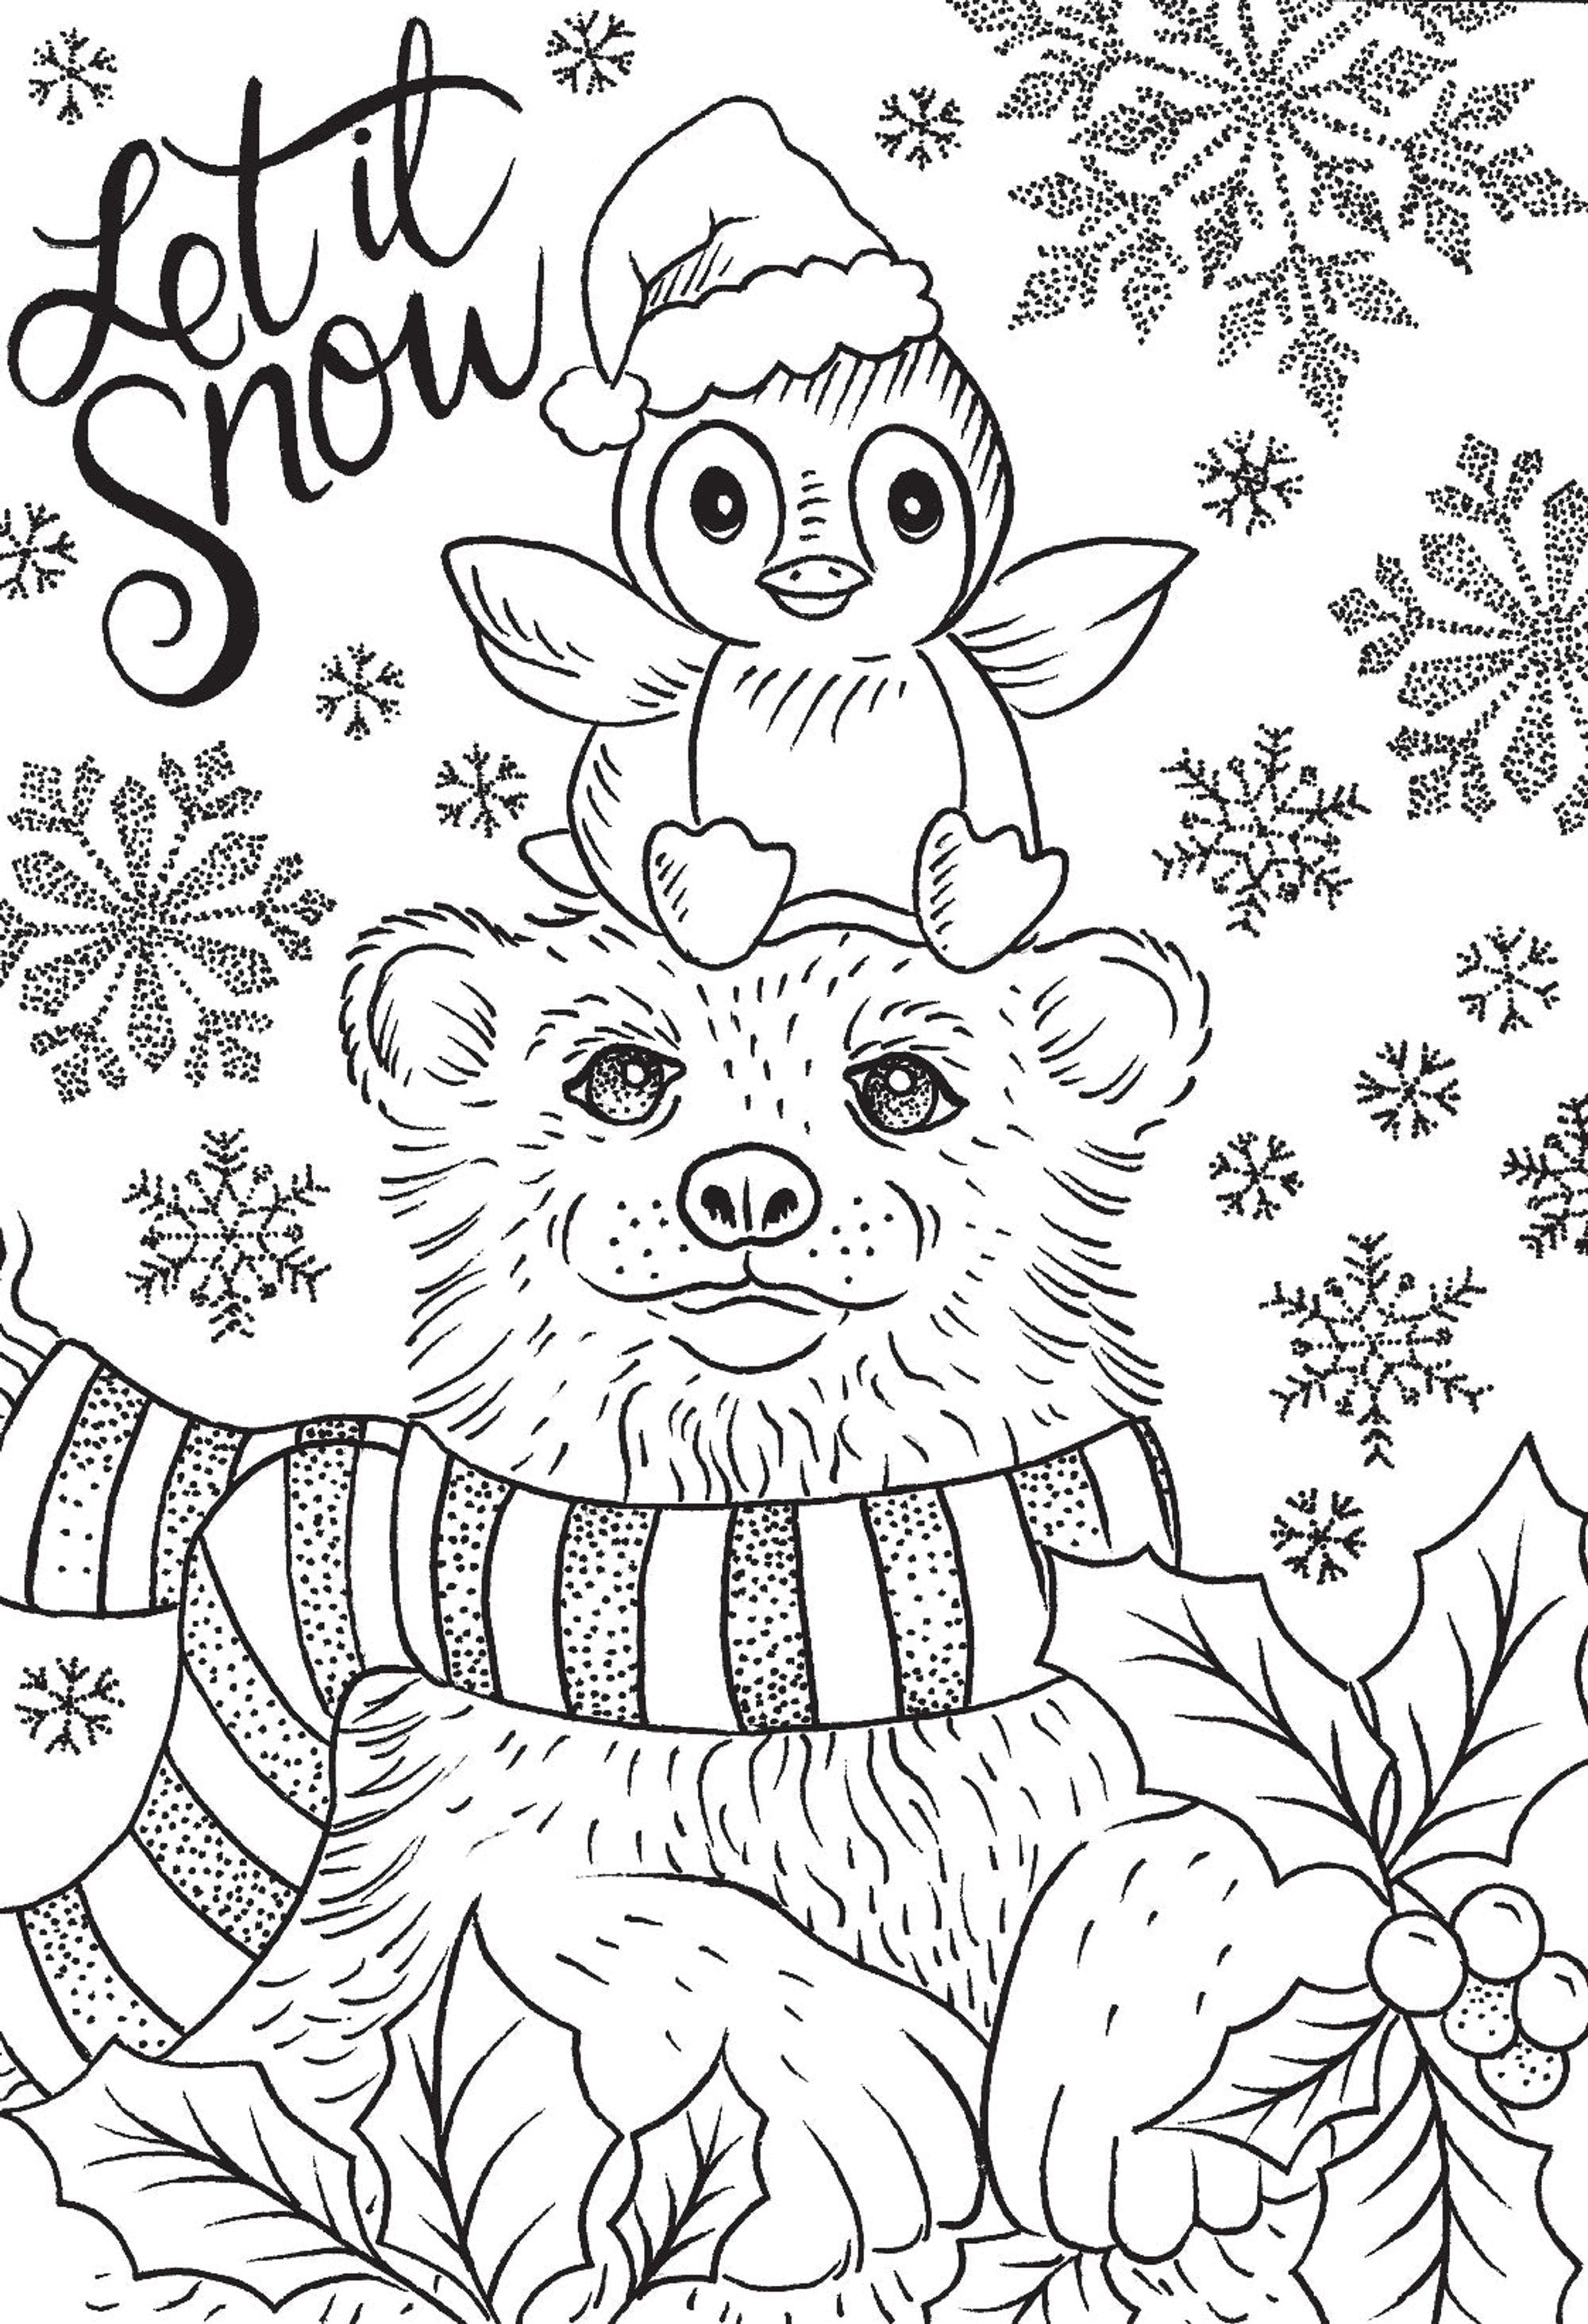 Creative Expressions Designer Boutique Snow Buddies 6 in x 4 in Clear Stamp Set